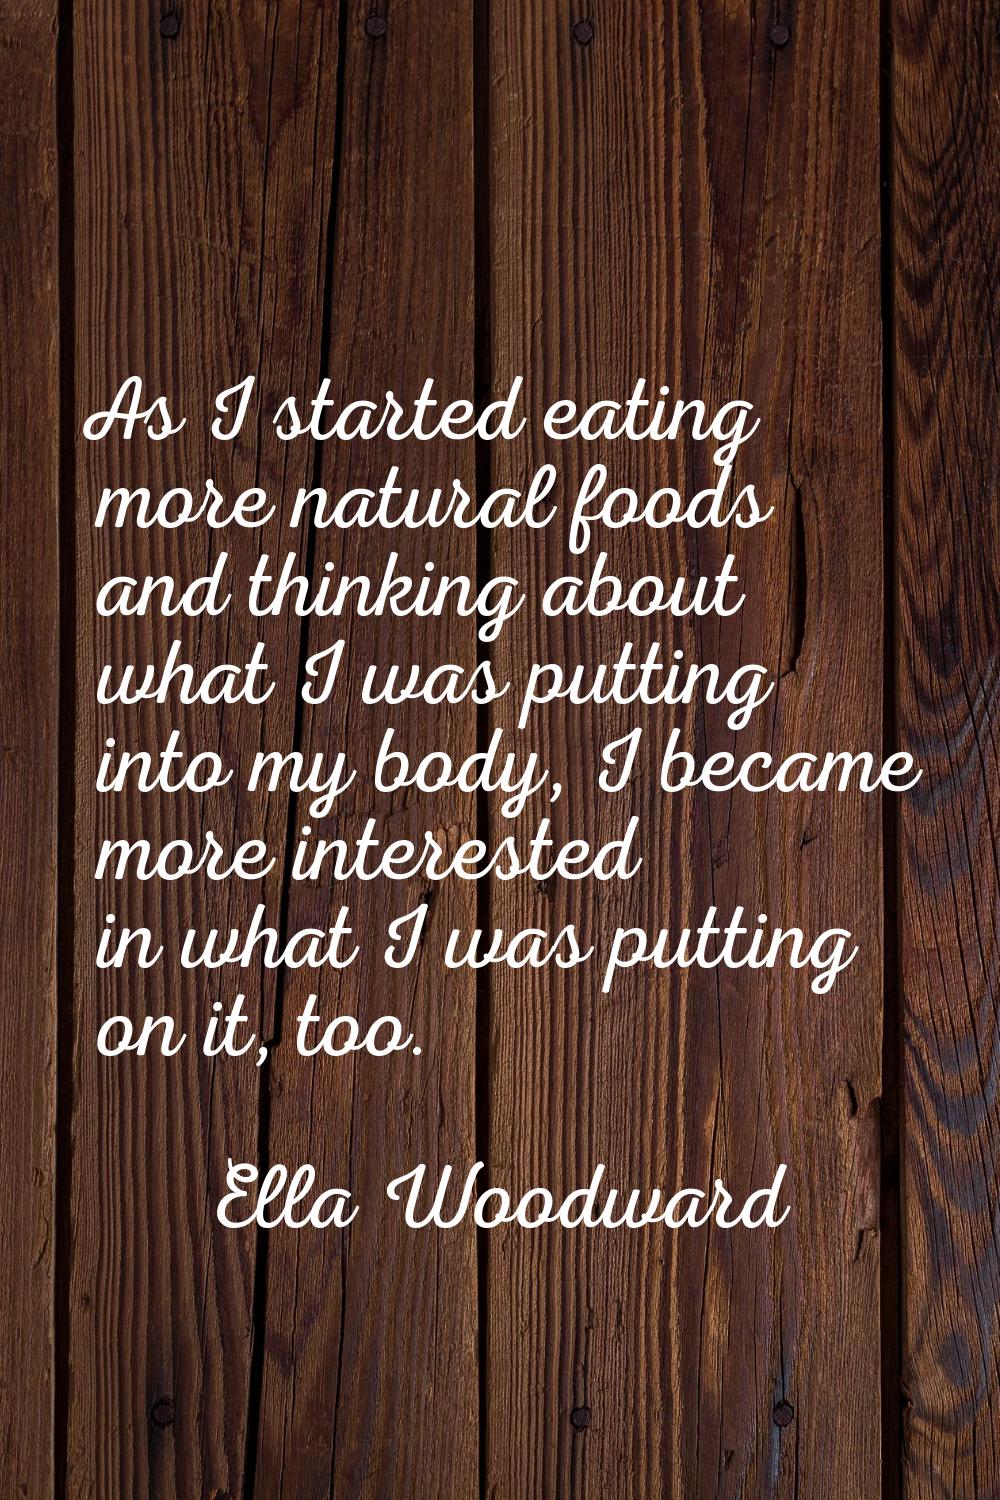 As I started eating more natural foods and thinking about what I was putting into my body, I became